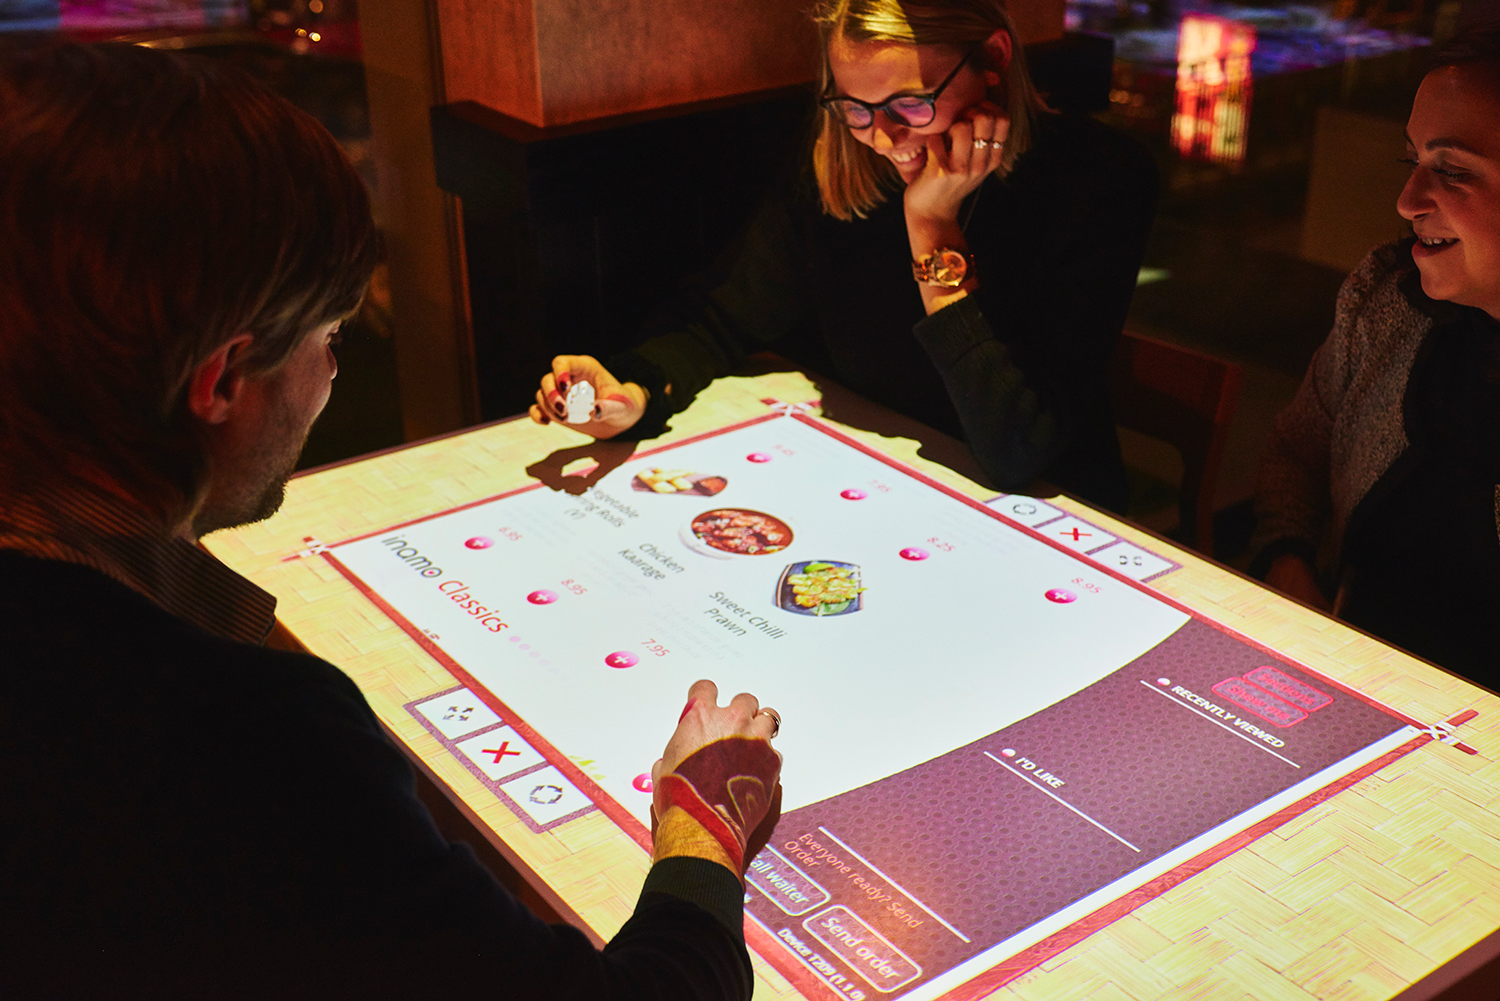  Guests can order food through their interactive menu projected onto their table. 